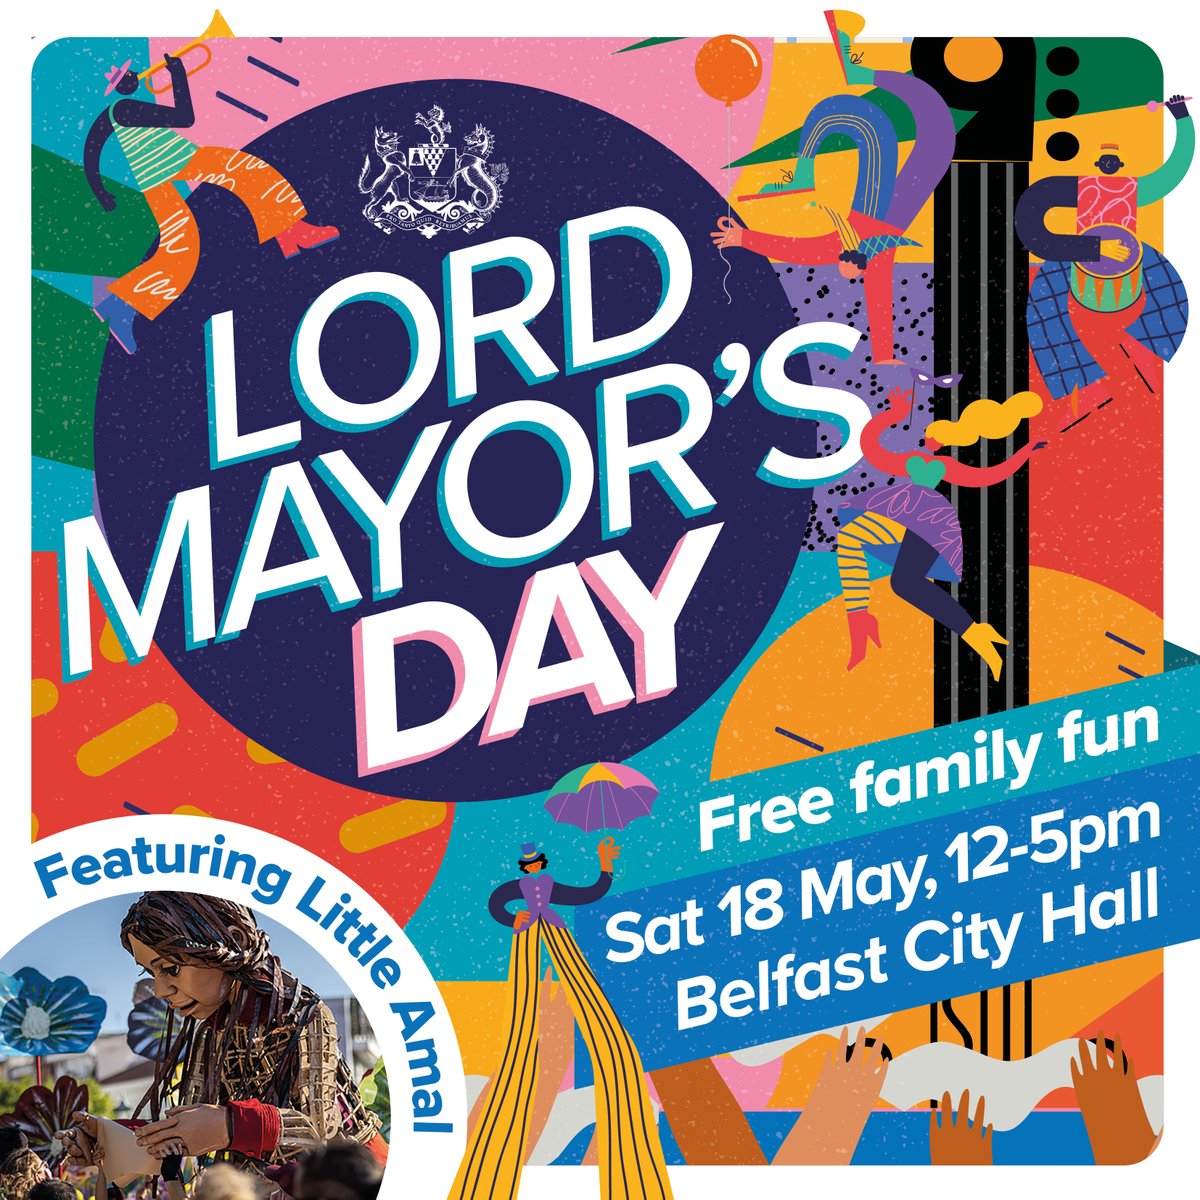 Lord Mayor @Cllrryanmurphy is hosting a free fun day to mark his year in office ✨ 📅Sat 18 May ⏰12pm-5pm Enjoy activities on our lawn including: 👧Little Amal @walkwithamal @artsekta 🤸performers 🌸arts & crafts 🎨face-painting 🎪live circus ow.ly/brmp50Rzogm